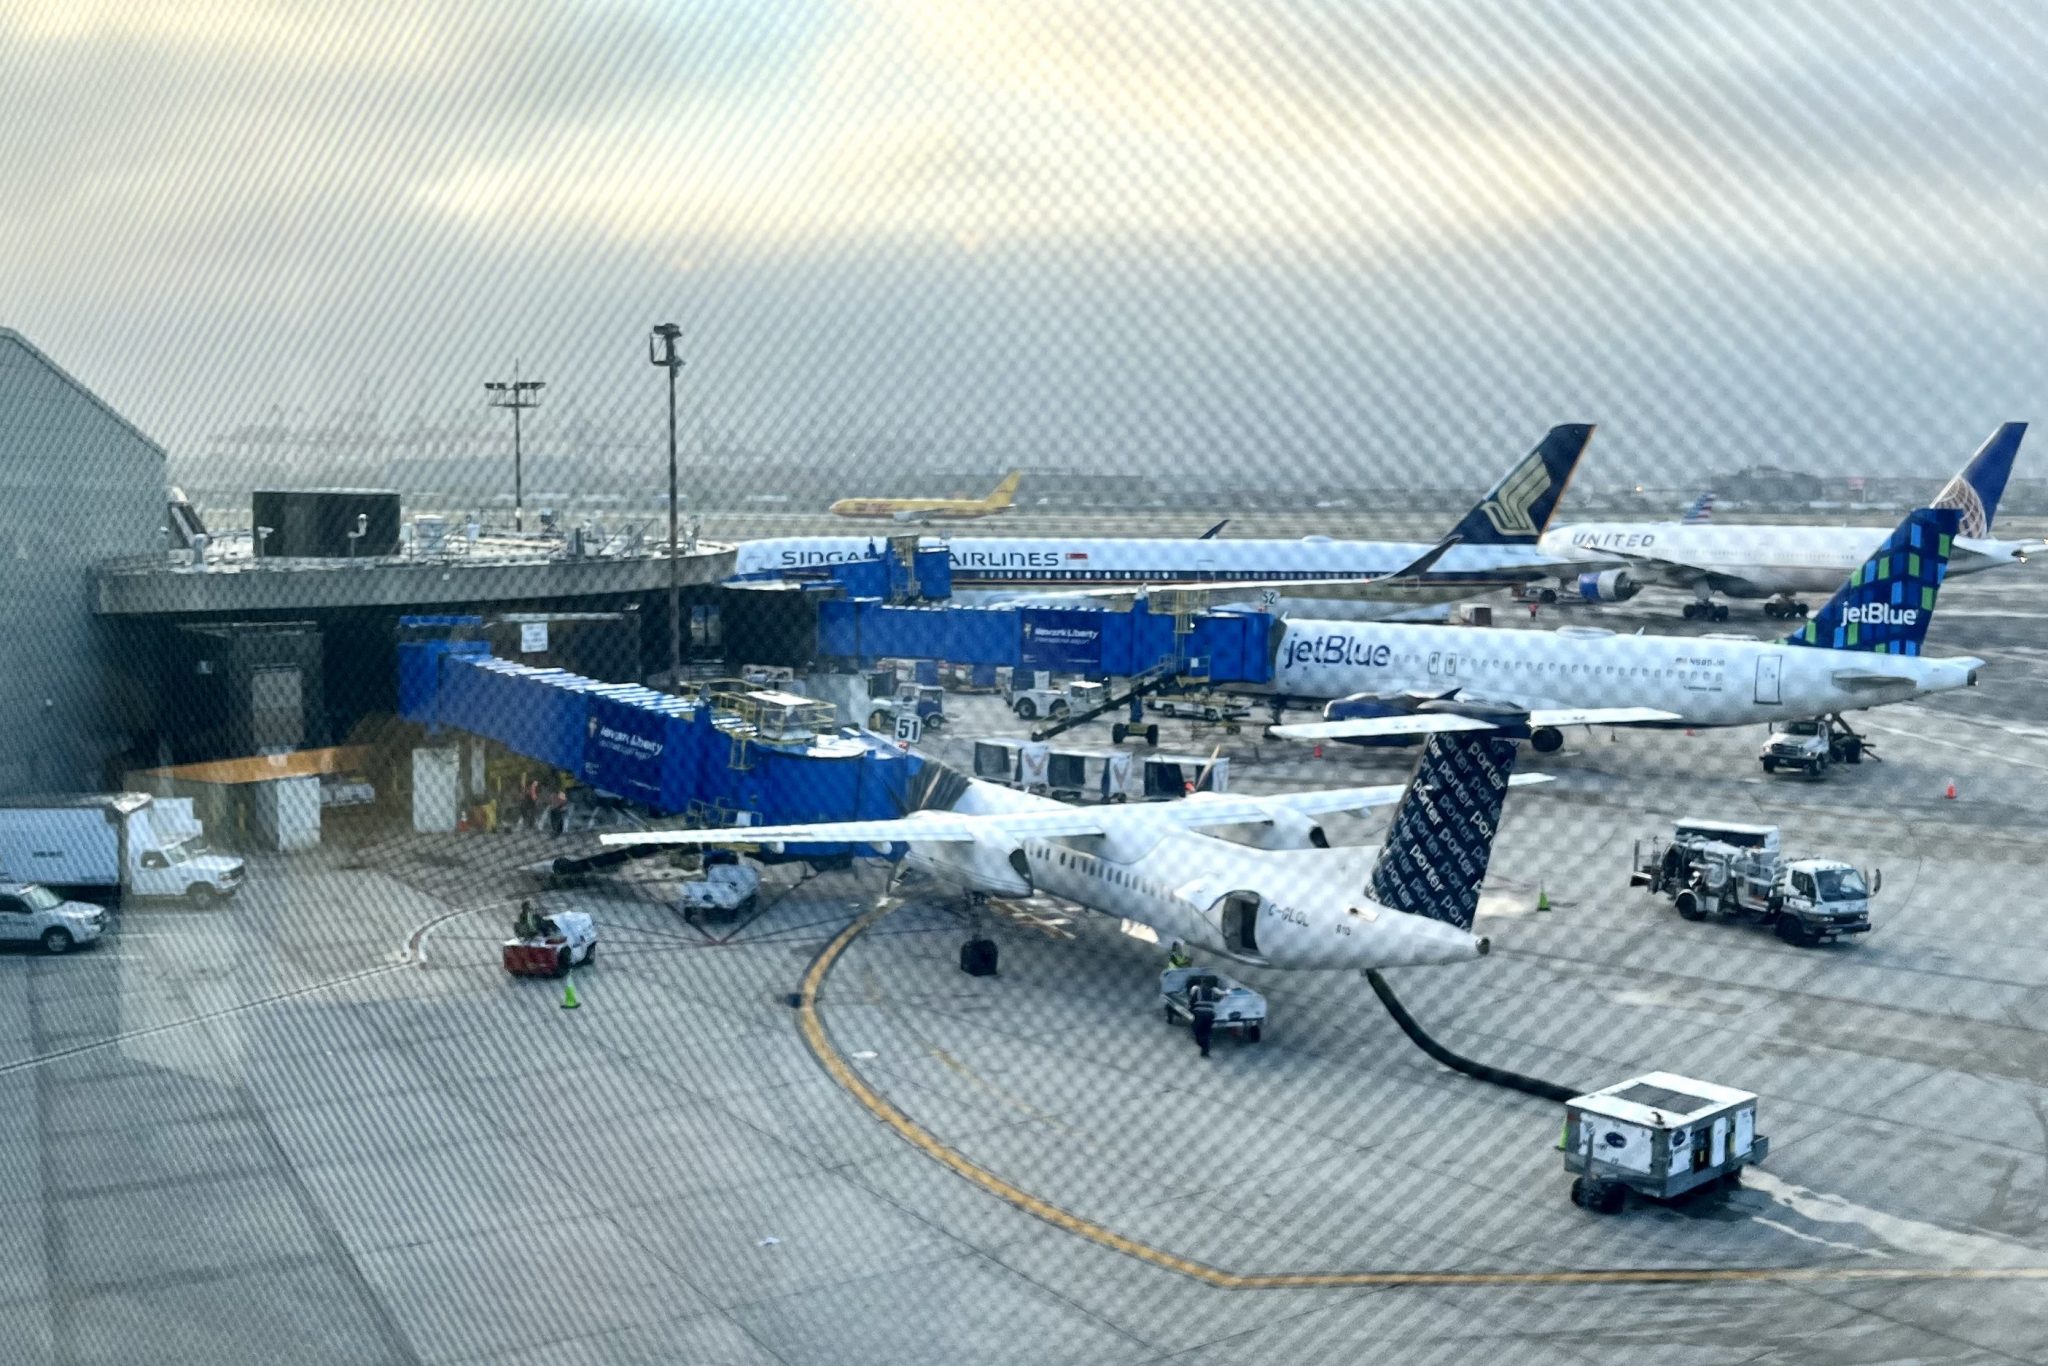 Porter Airlines, JetBlue Airways, Singapore Airlines, and United Airlines planes at Newark Airport. Source: Skift